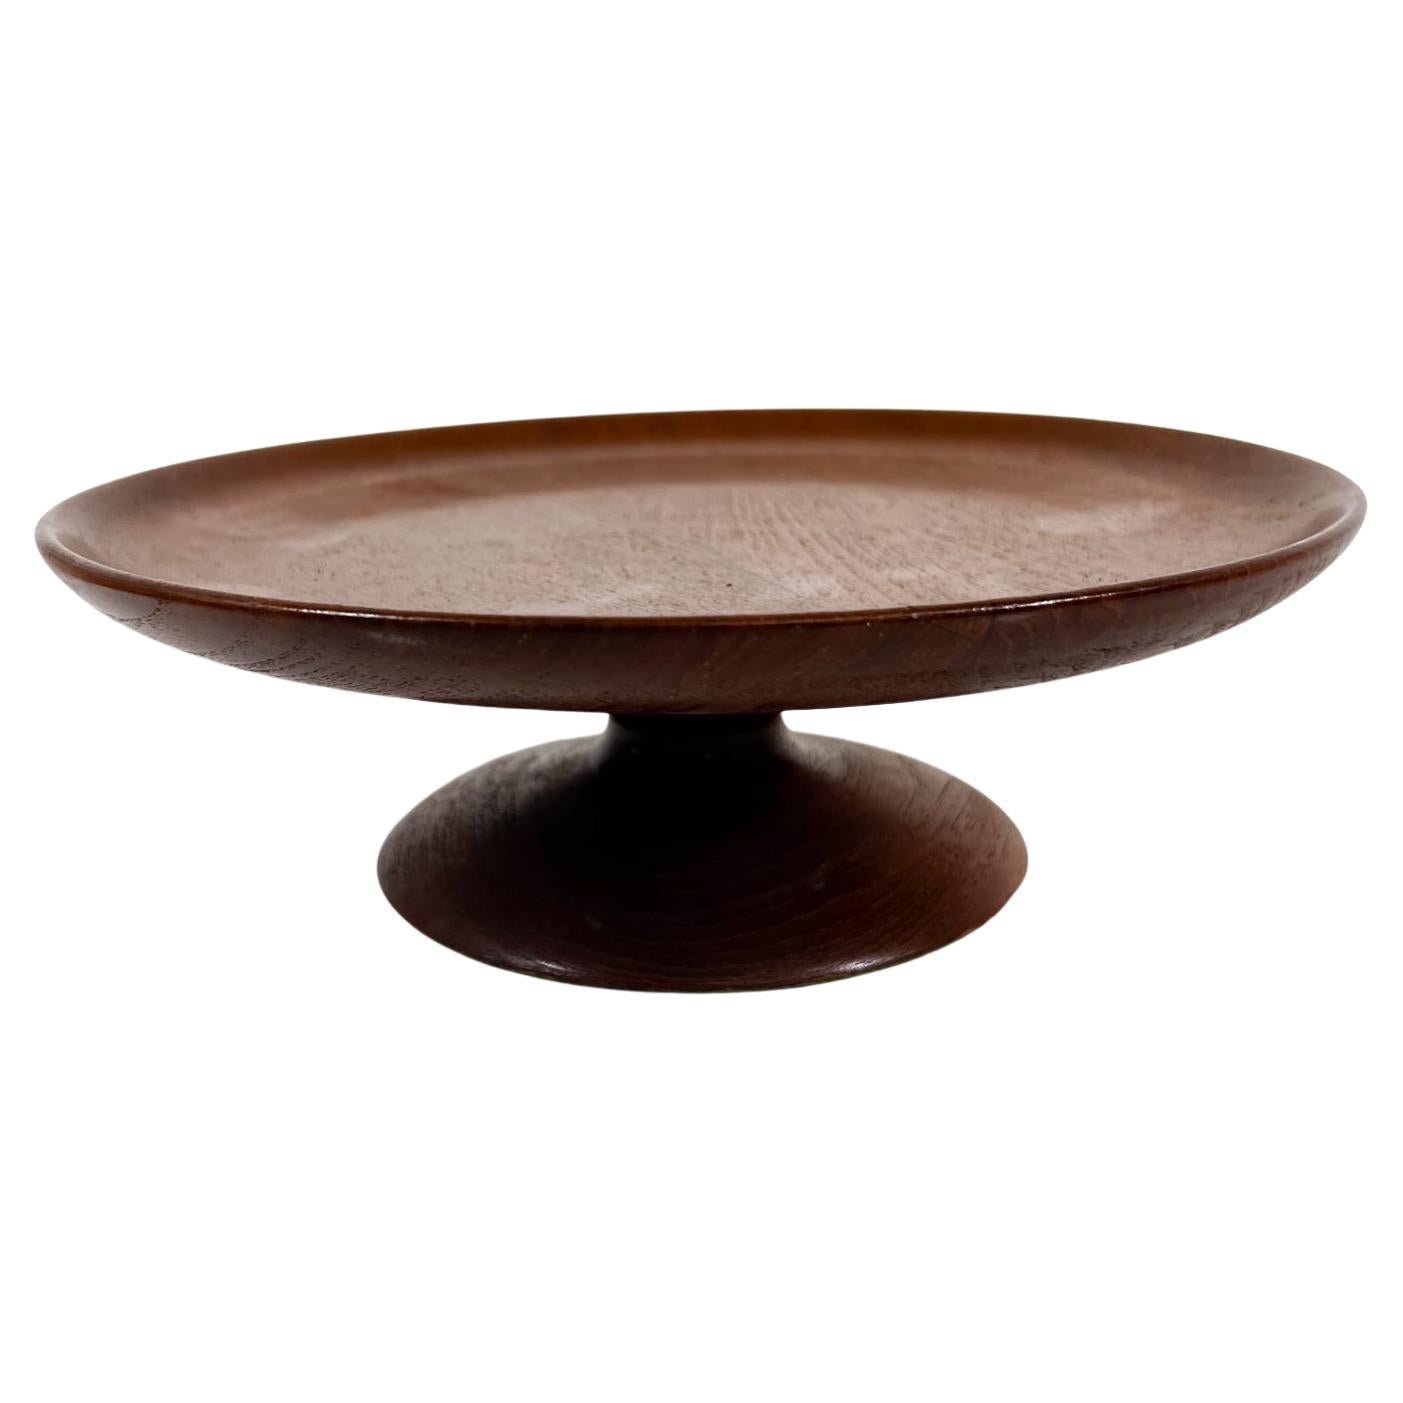 III. Different Types of Sculptural Cake Stands